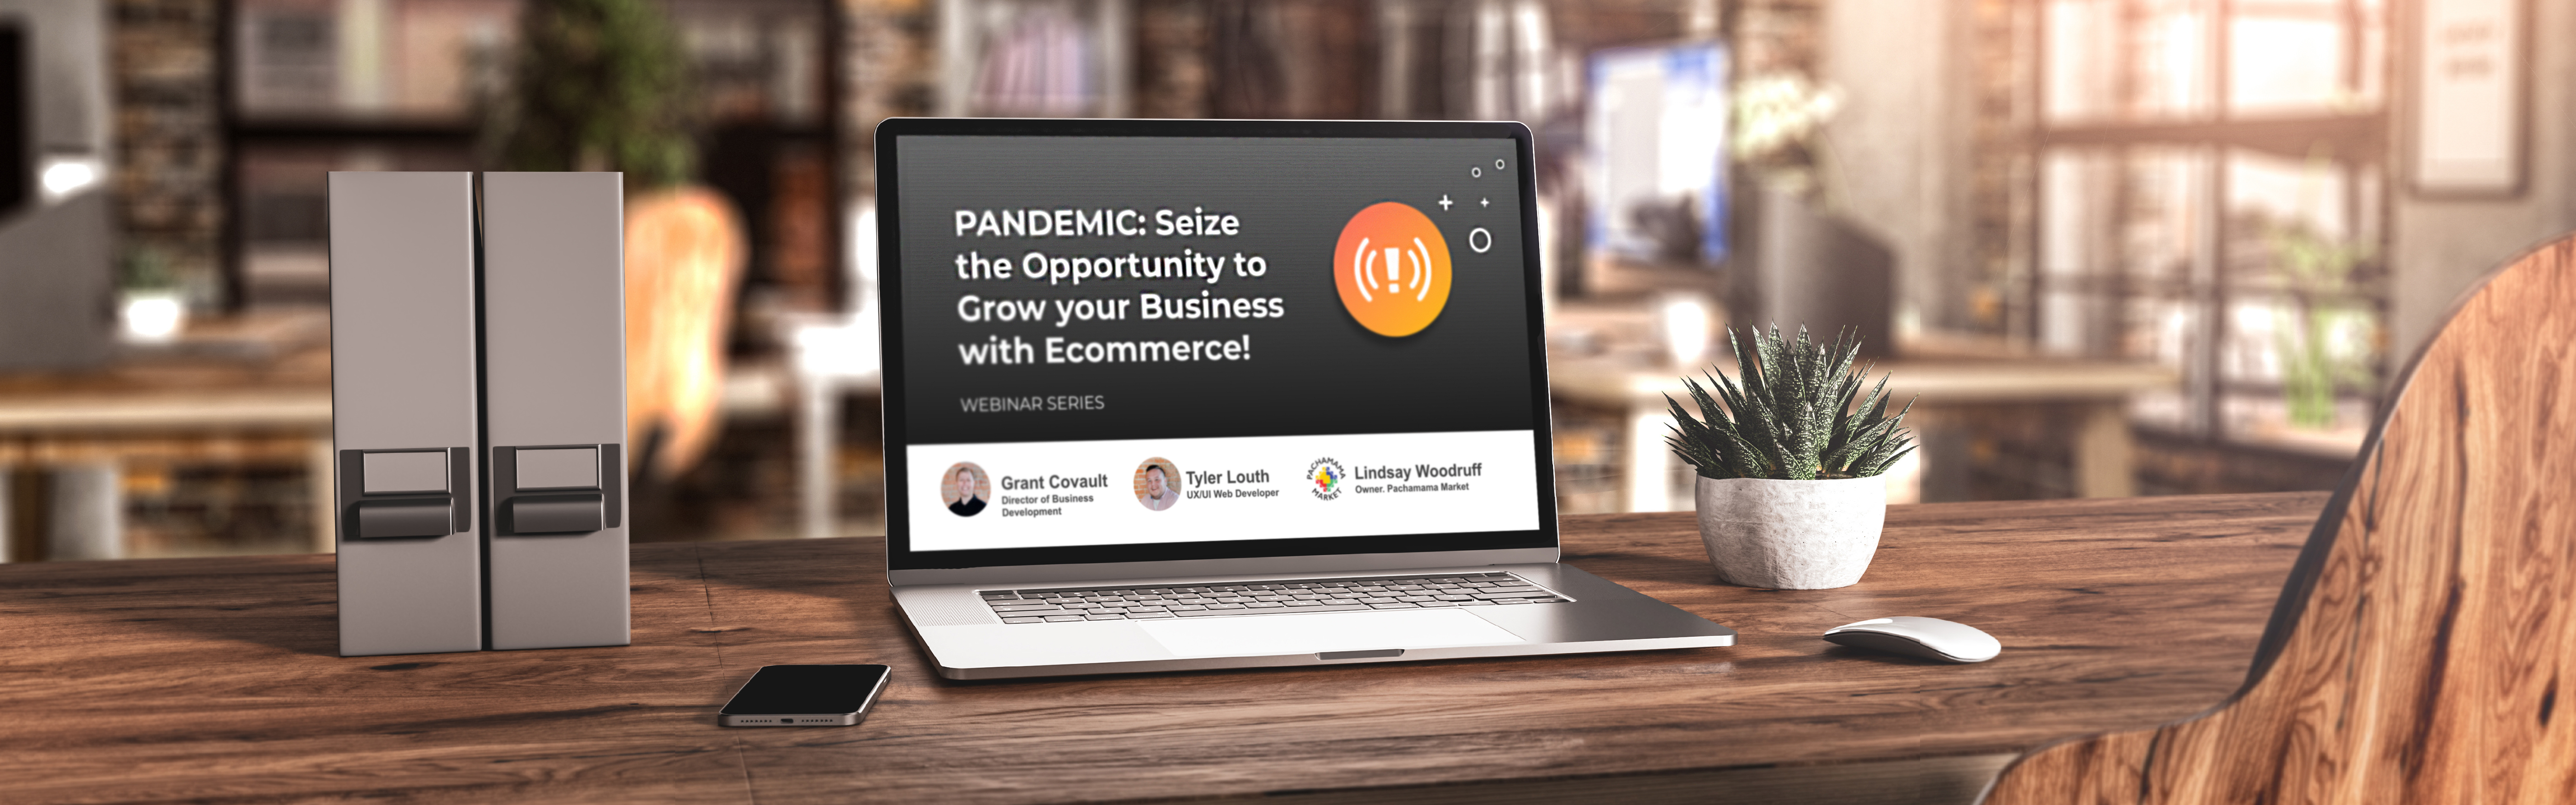  Webinar on how to grow your business with ecommerce